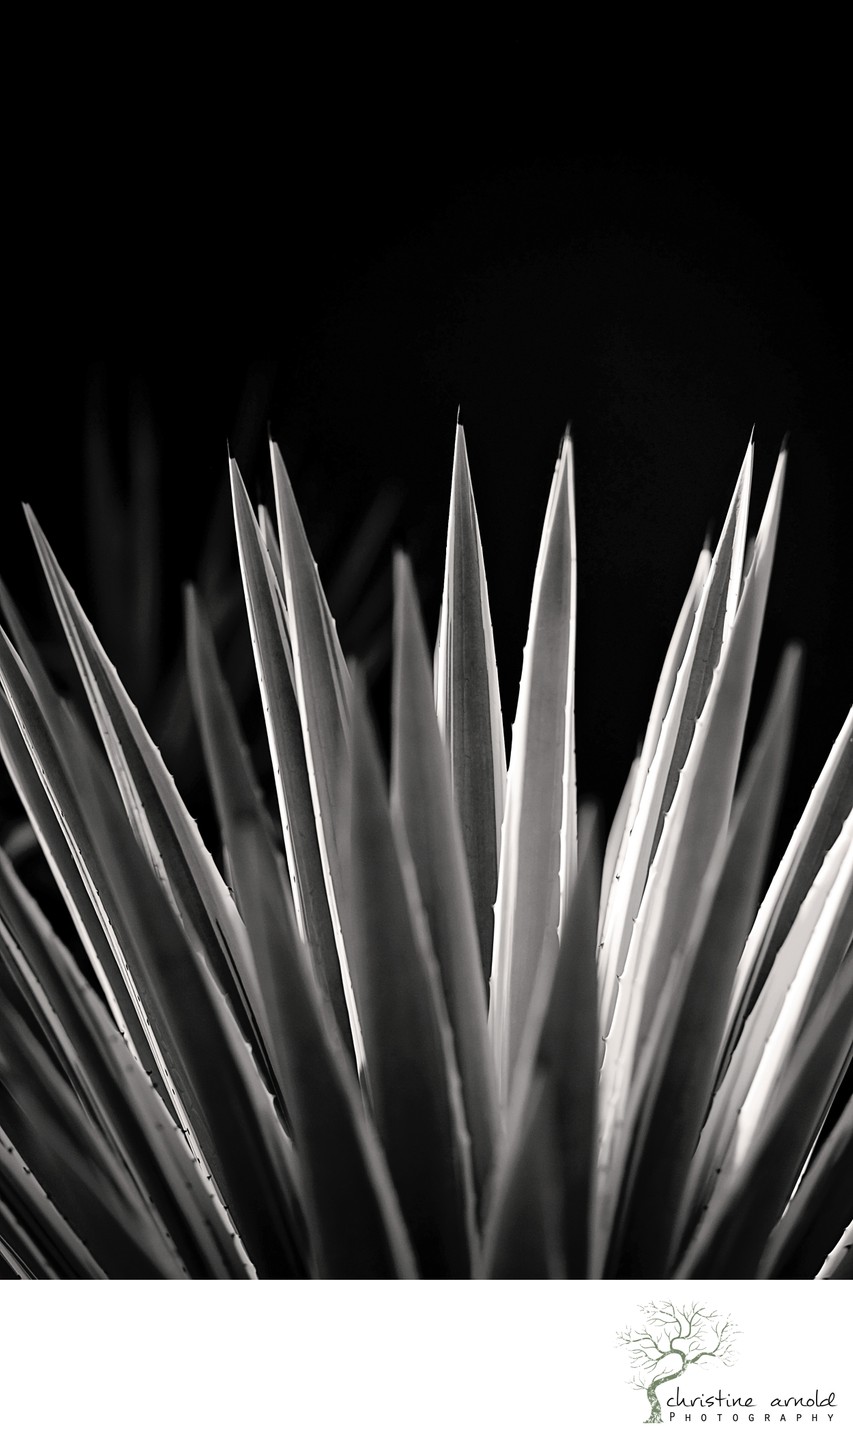 Black and white fine art photography, nature photos